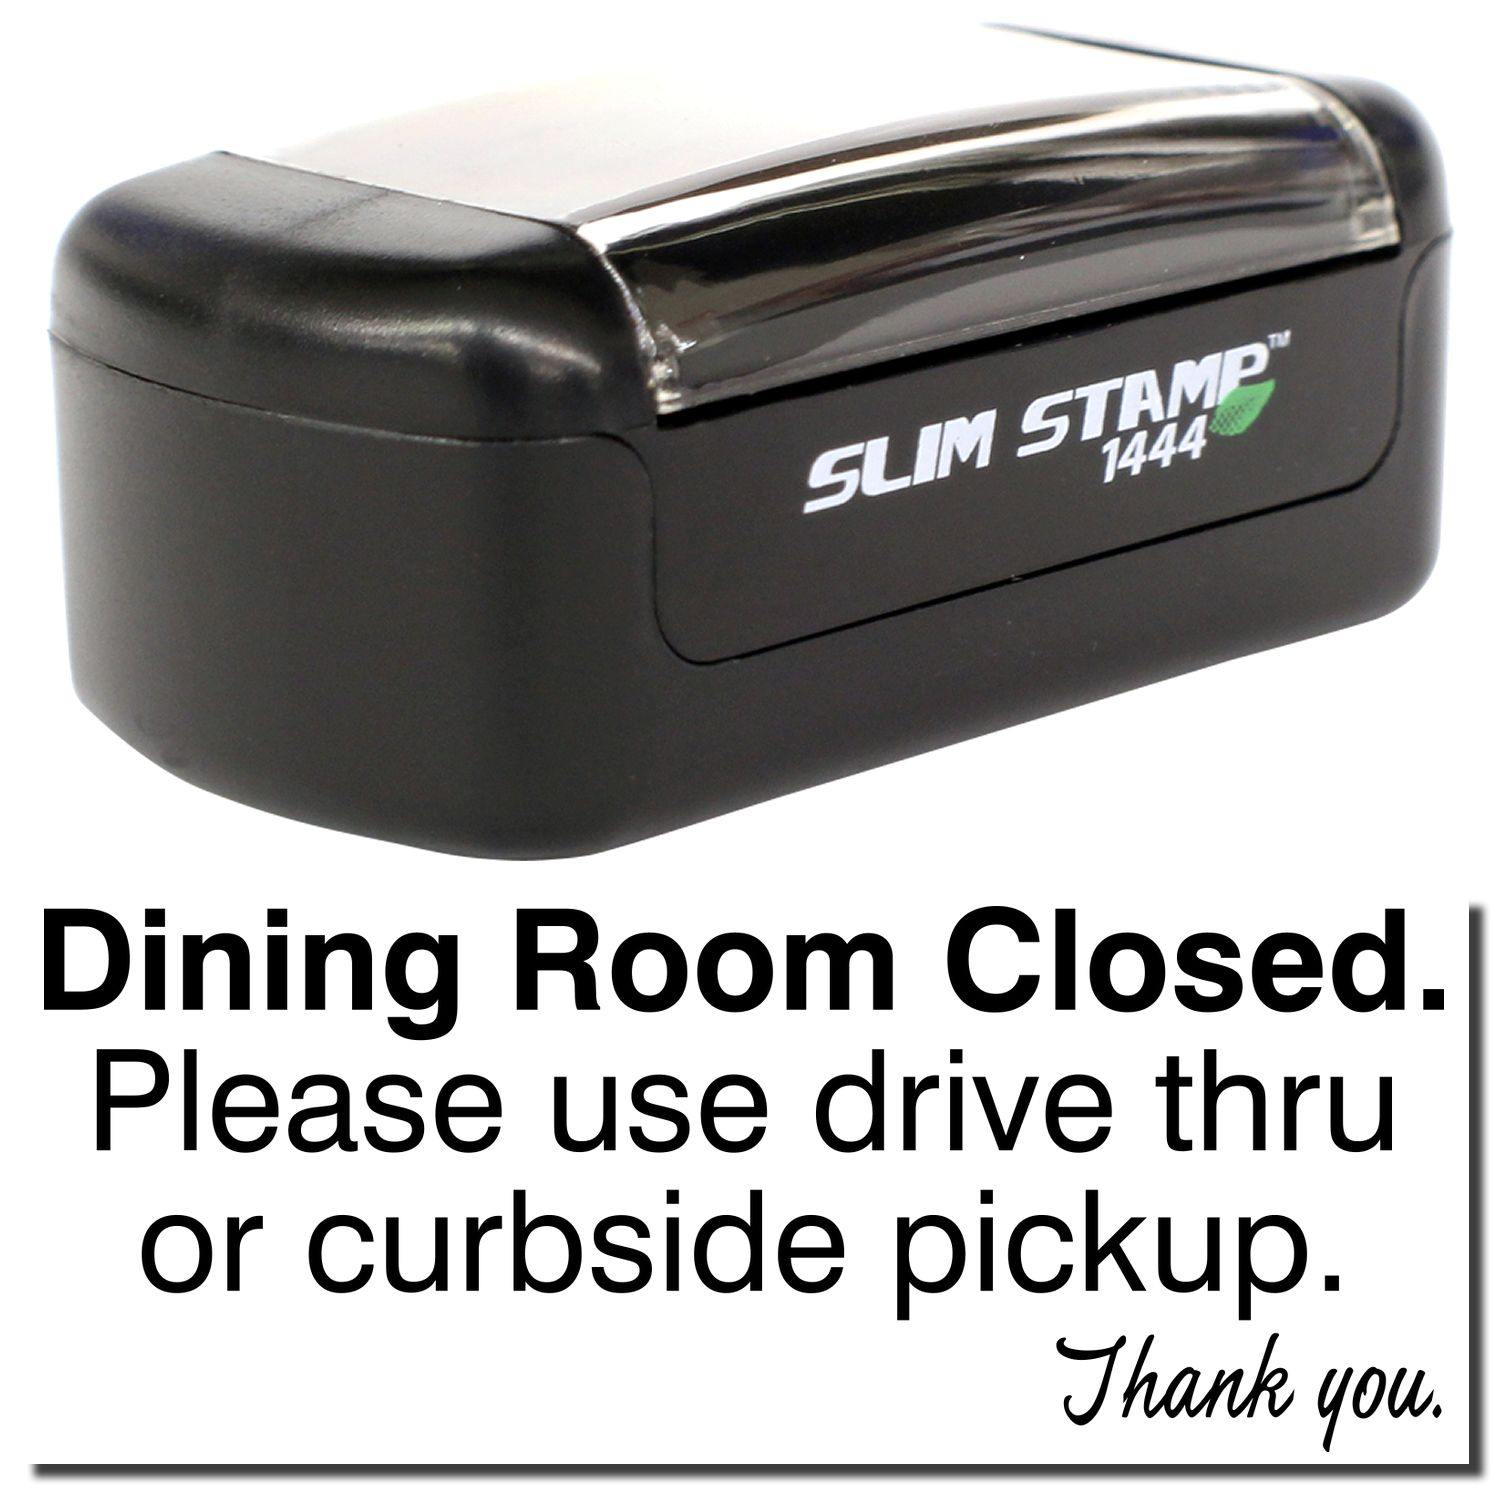 A stock office pre-inked stamp with a stamped image showing how the text "Dining Room Closed. Please use drive thru or curbside pickup. Thank you." is displayed after stamping.